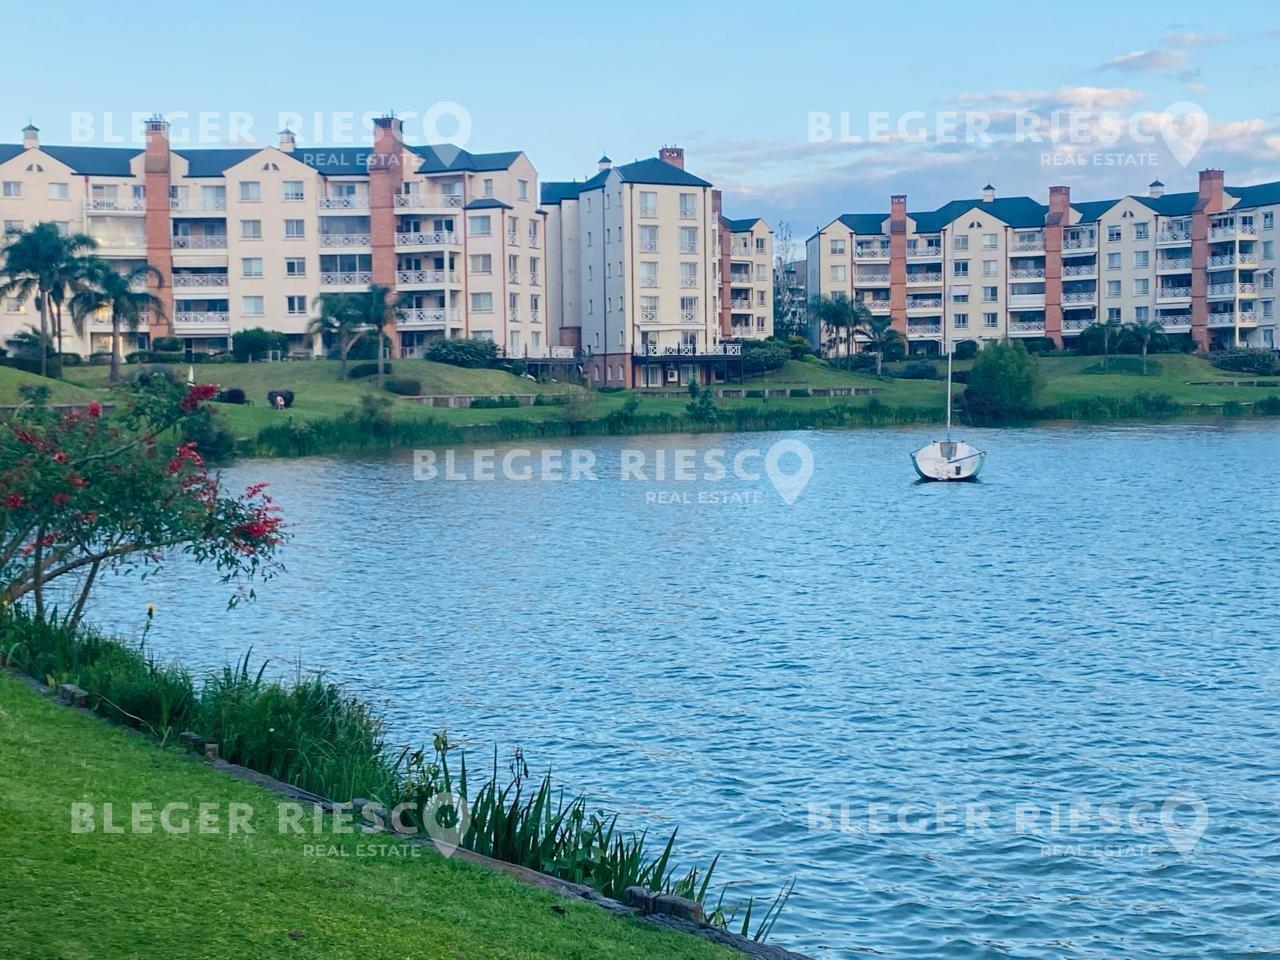 #5002117 | Rental | Apartment | Portezuelo (Bleger-Riesco Real State)